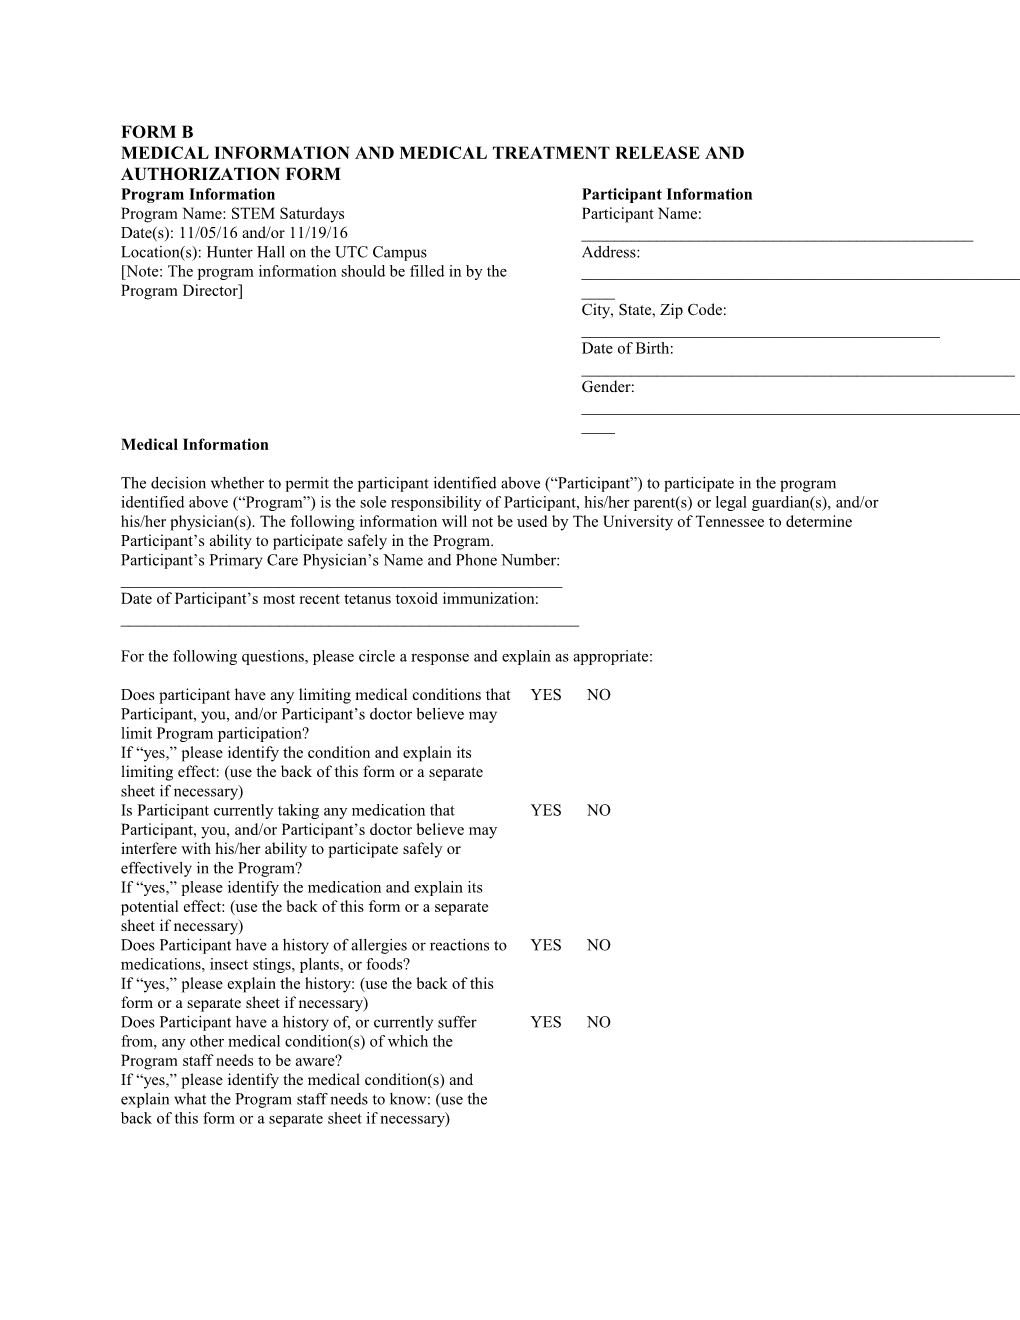 Medical Information and Medical Treatment Release and Authorization Form